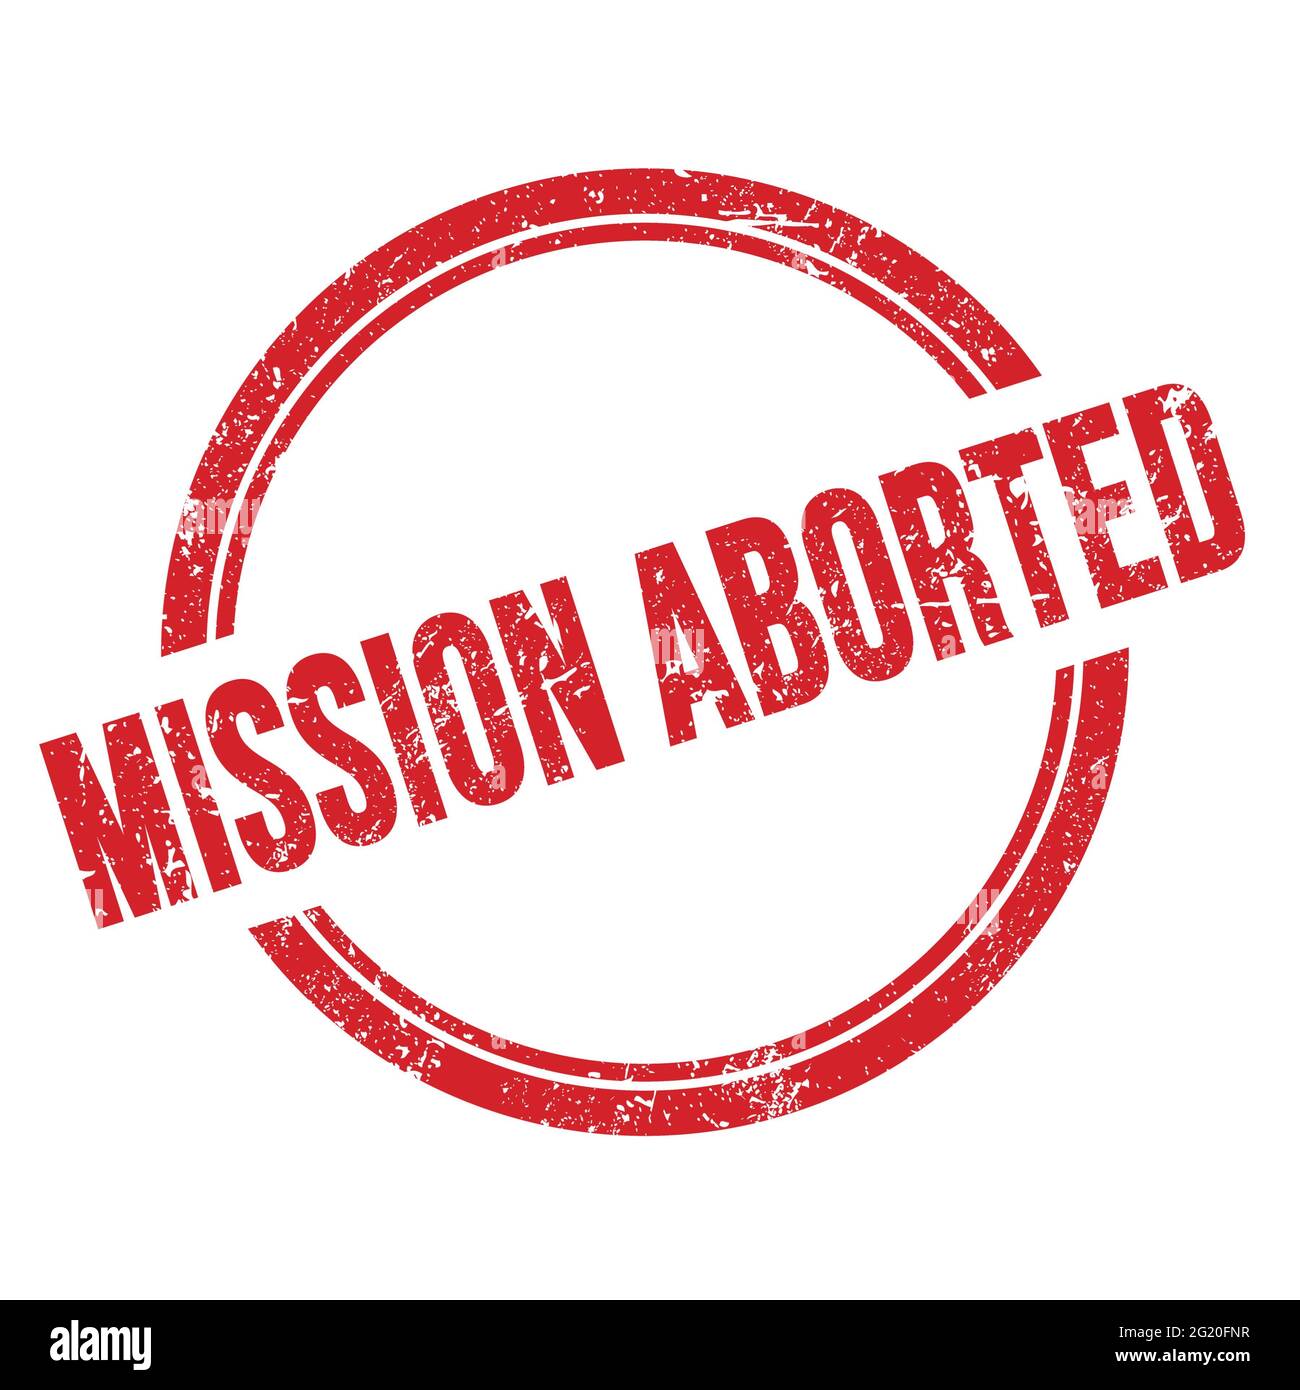 MISSION ABORTED text written on red grungy vintage round stamp. Stock Photo